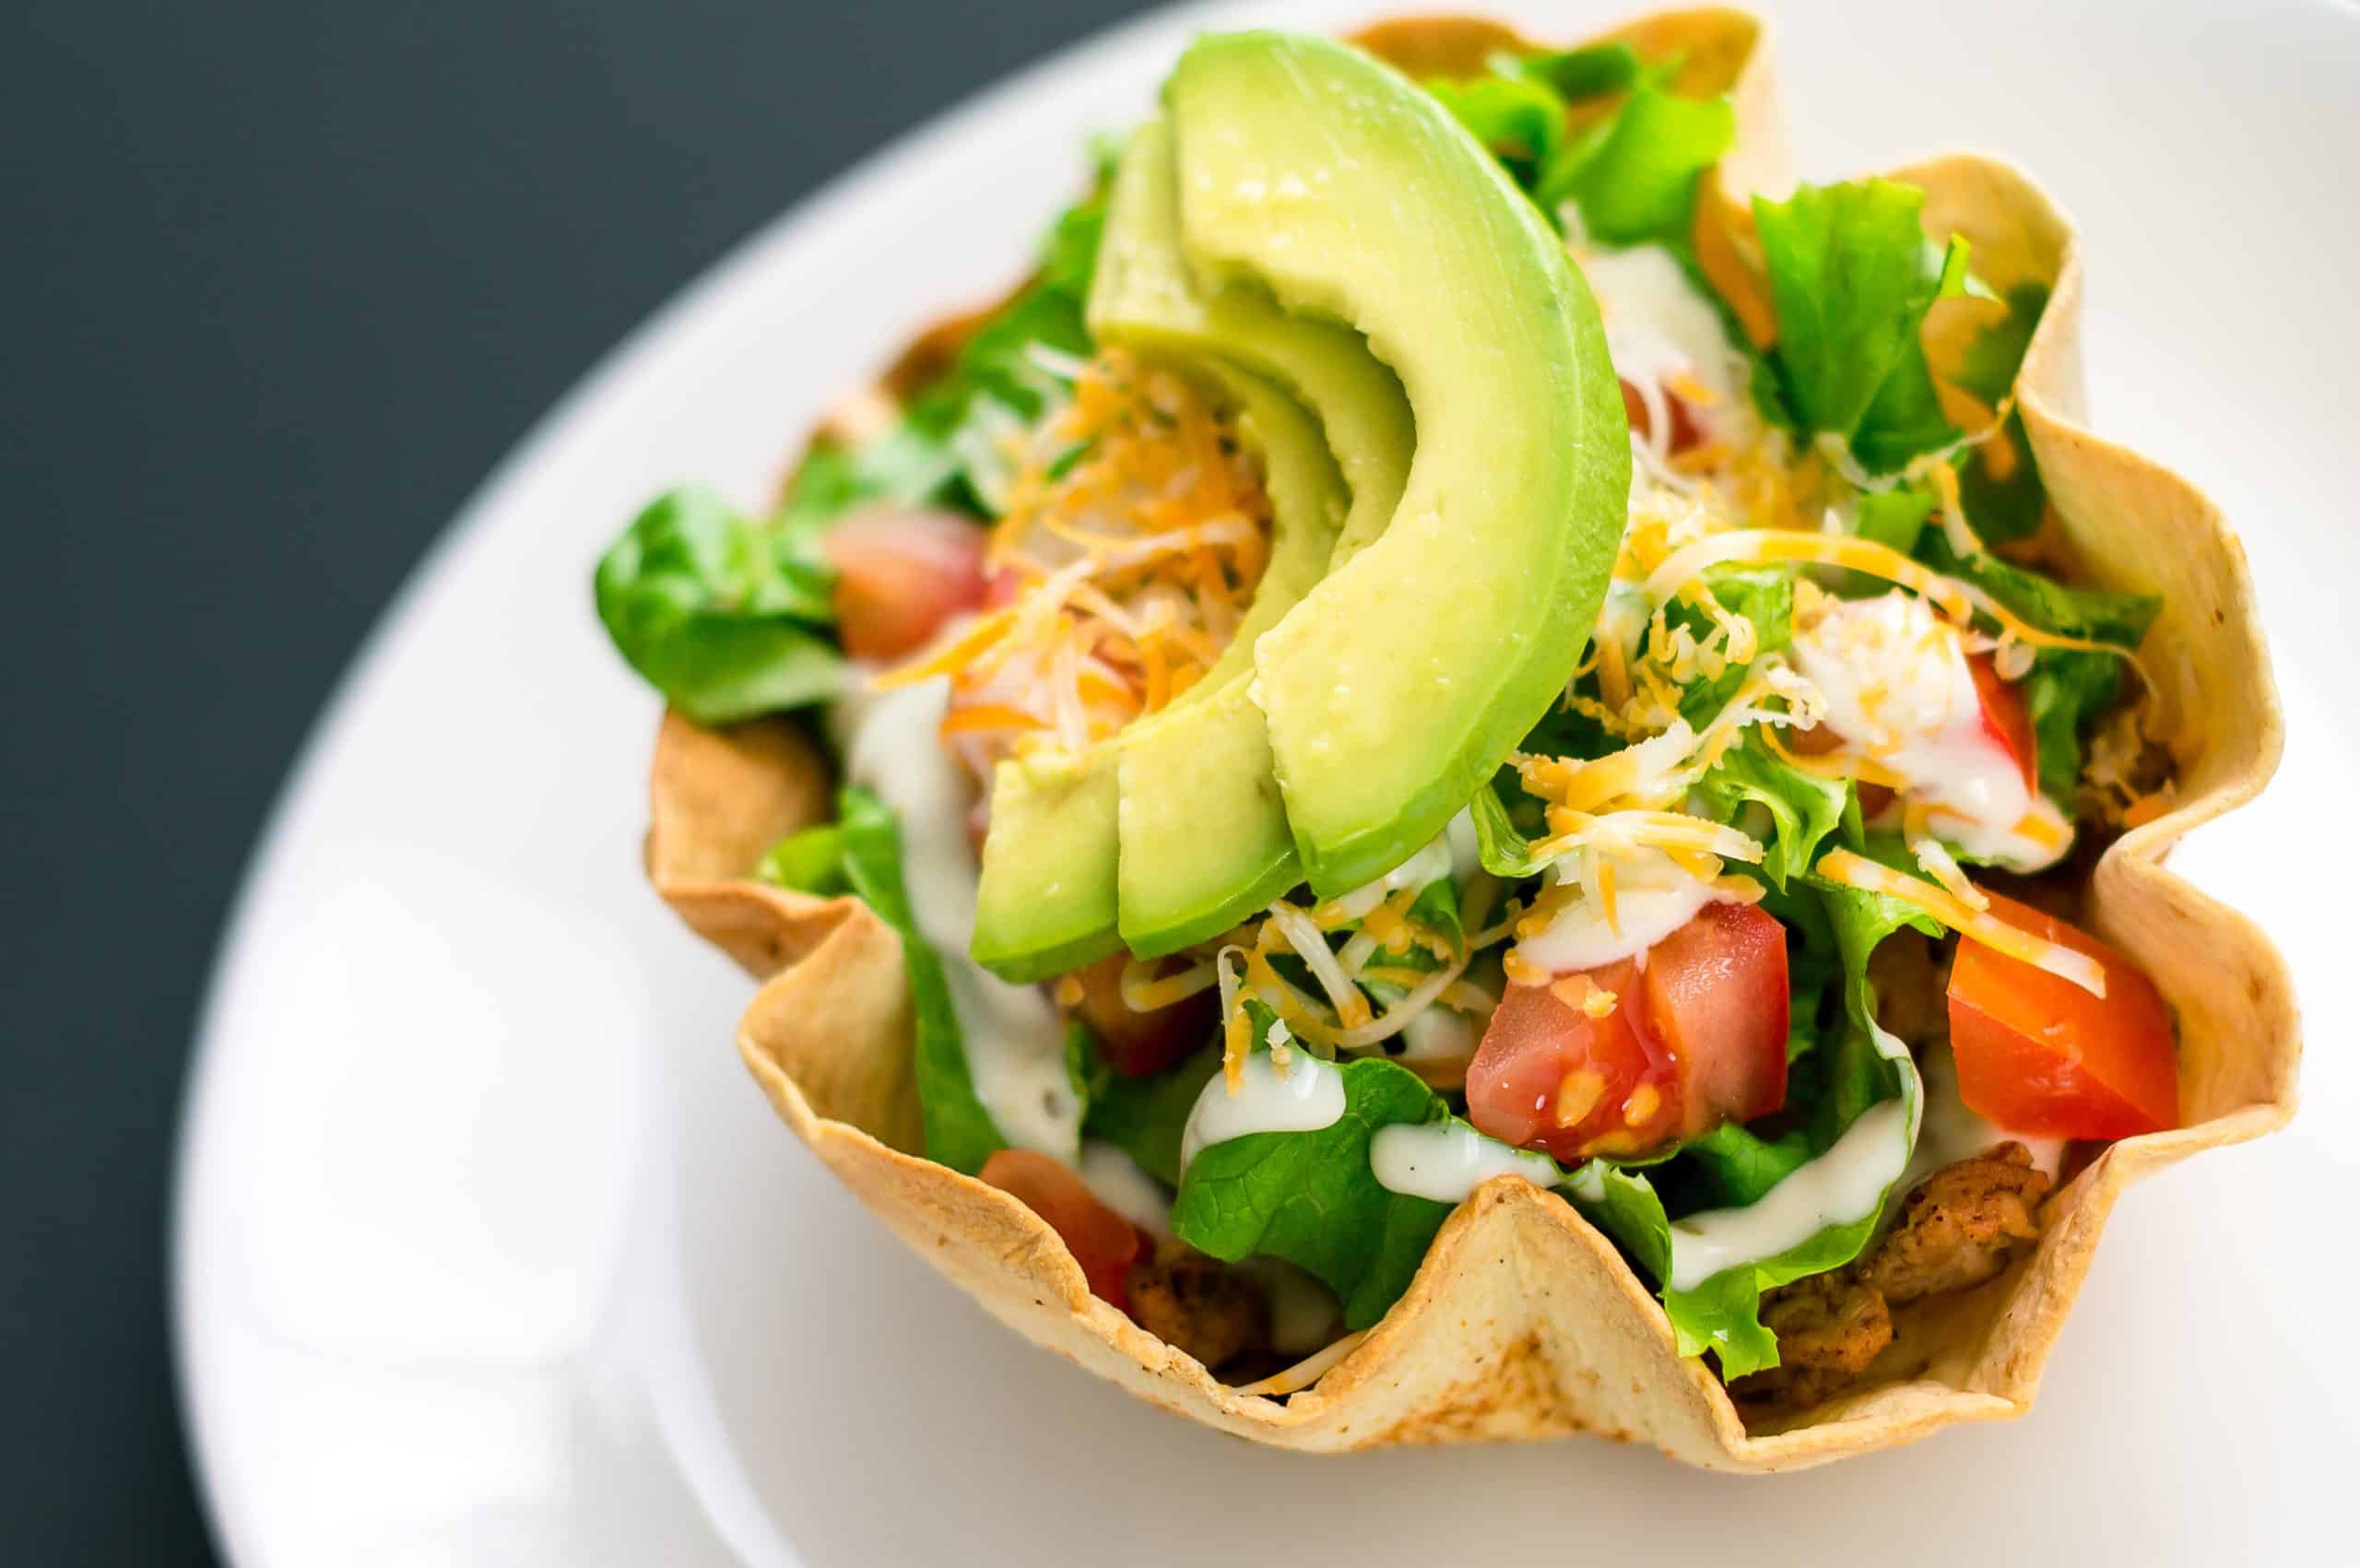 A taco salad in tortilla bowl is a fun and colorful way to eat mexican food. Made with fresh ingredients such as avocado, tomatoes, green salad, cheese and delicious greek yoghurt.